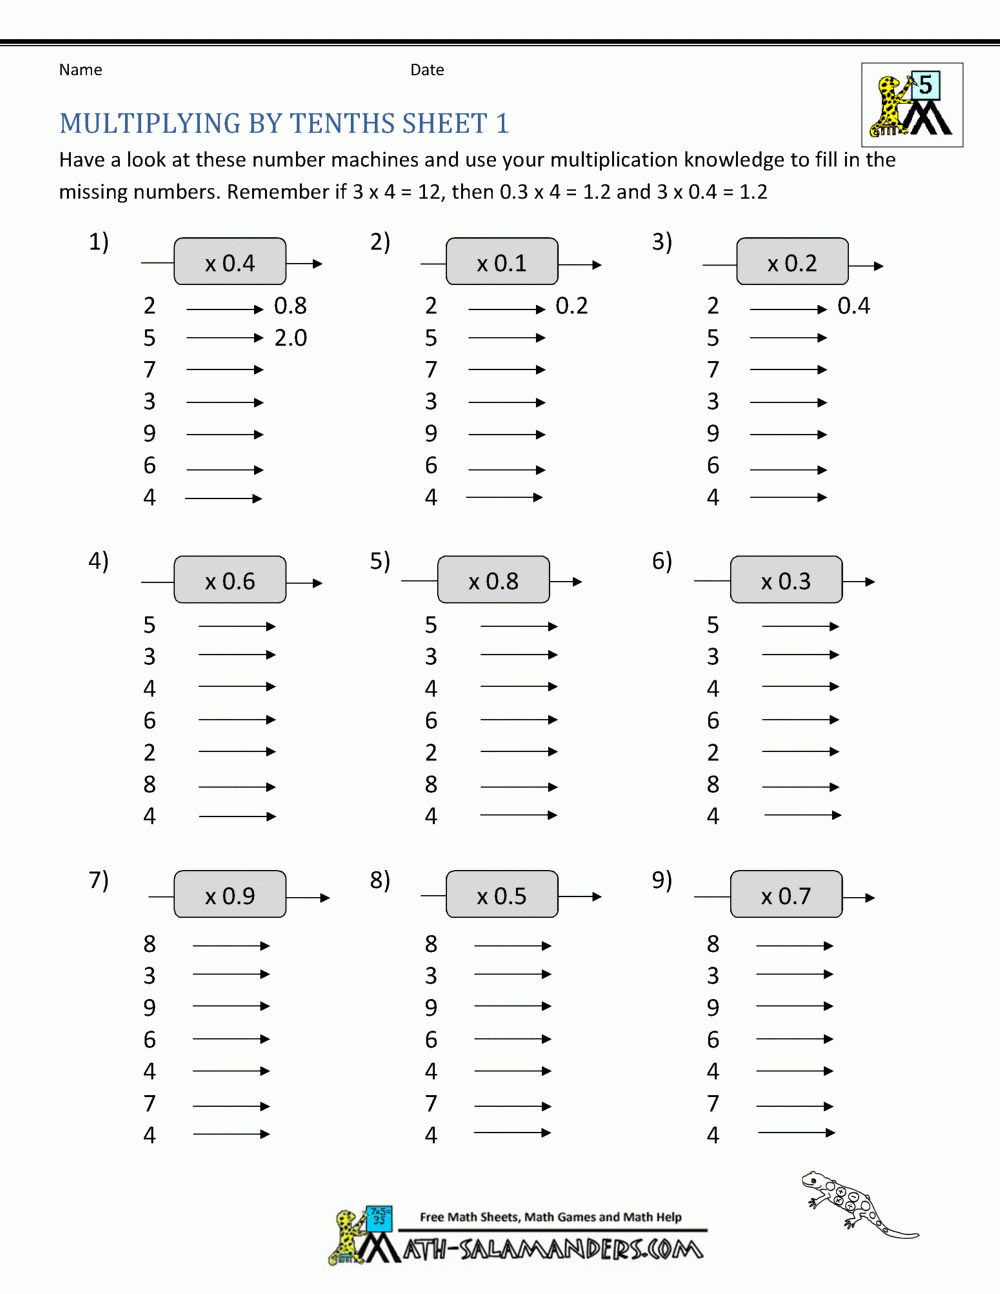 Multiplication Fact Sheet Collection pertaining to Printable Multiplication Worksheets 0-4